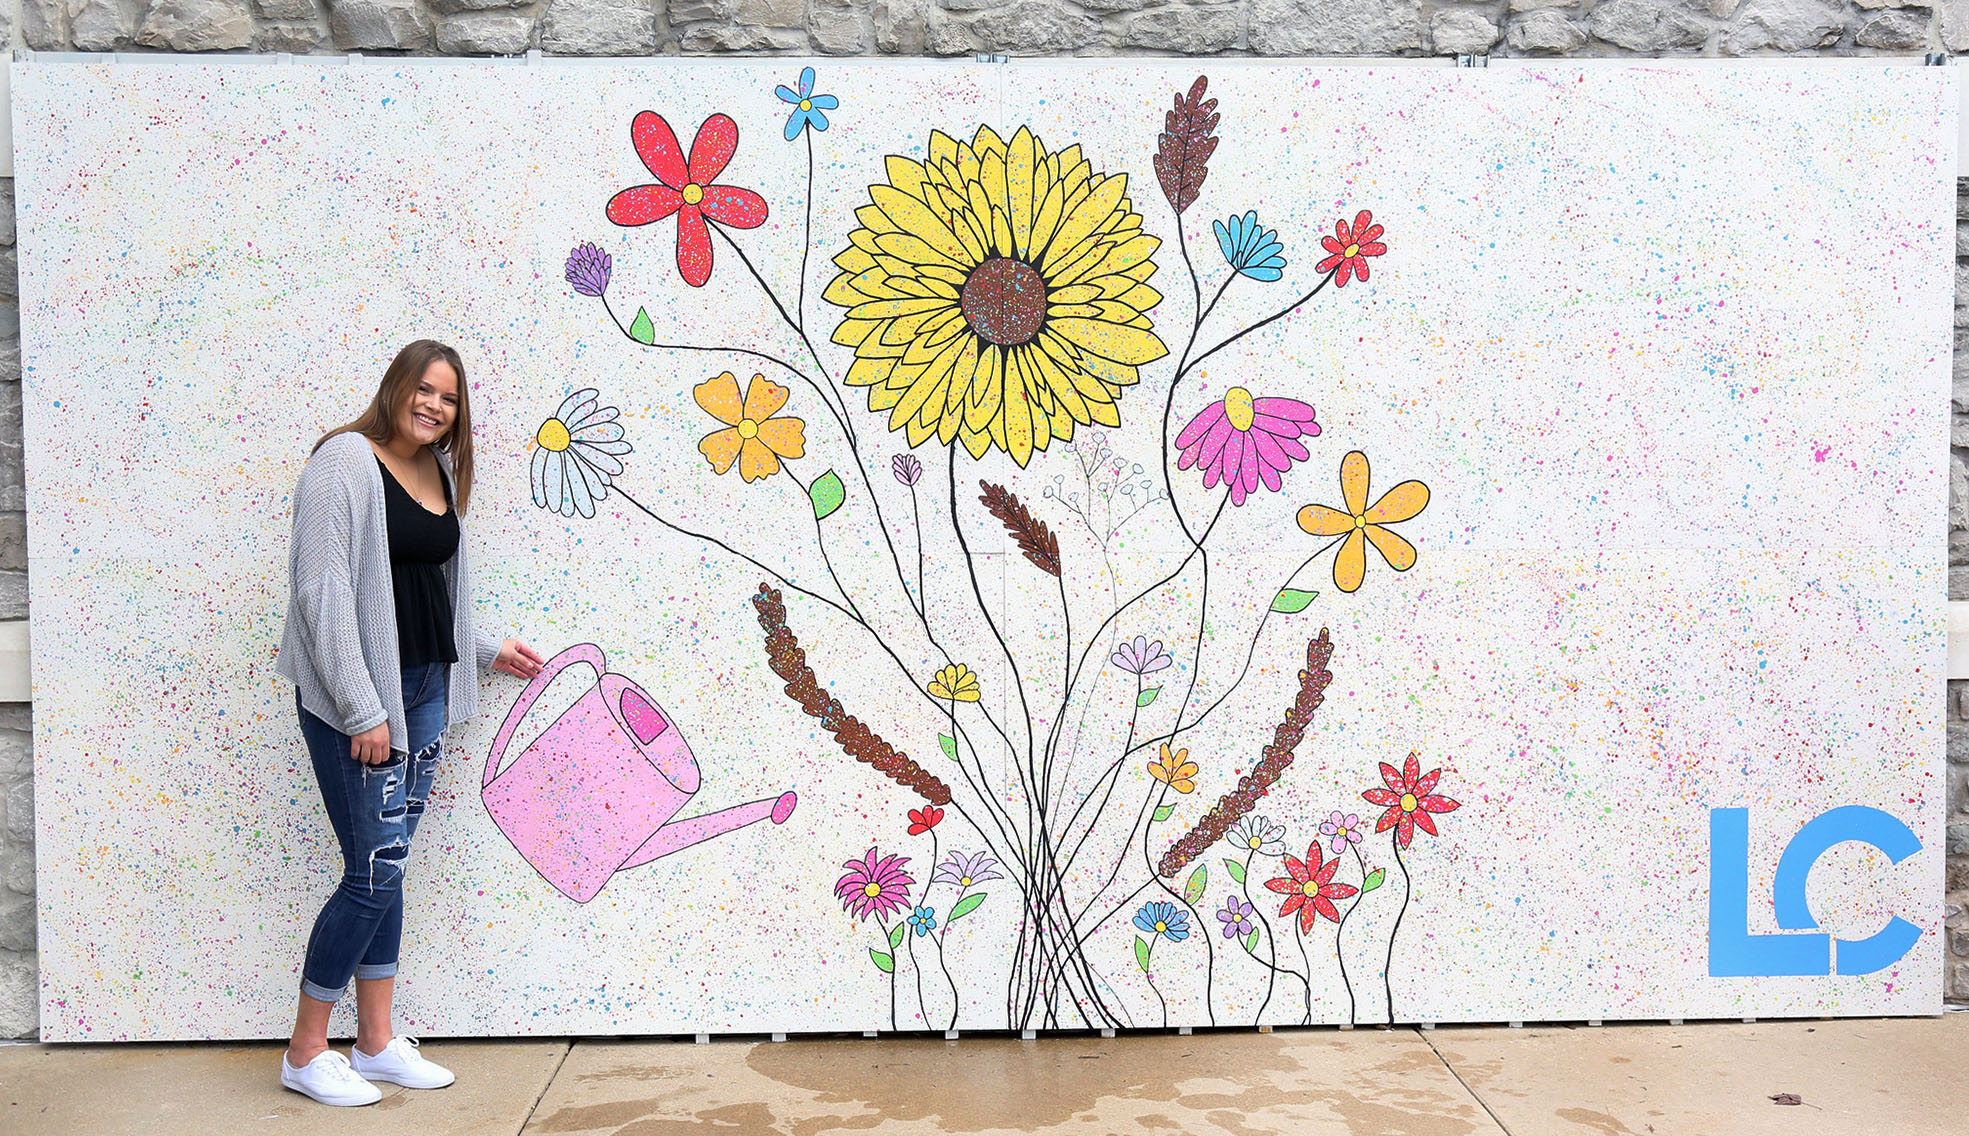 Interactive mural painted flowers